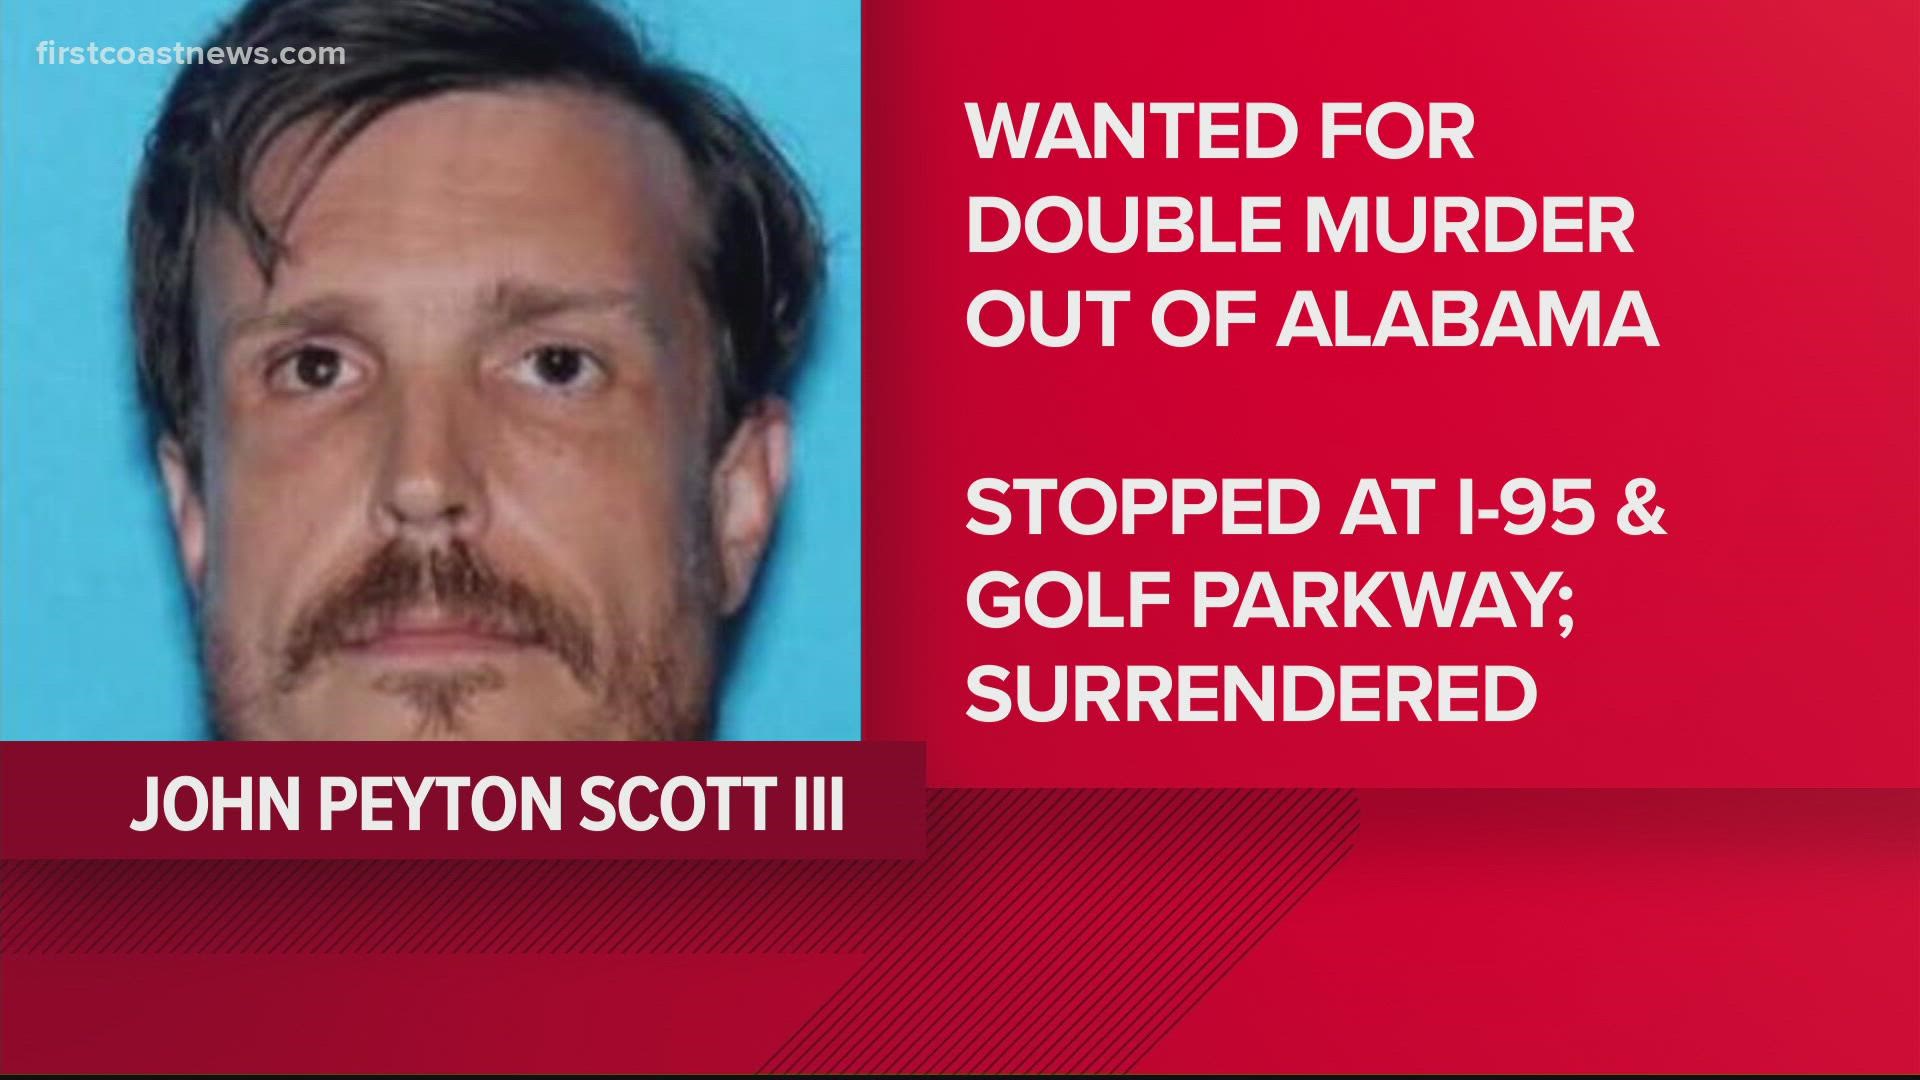 The St. Johns County Sheriff's Office has arrested a man who they say is wanted for double murder out of Alabama.